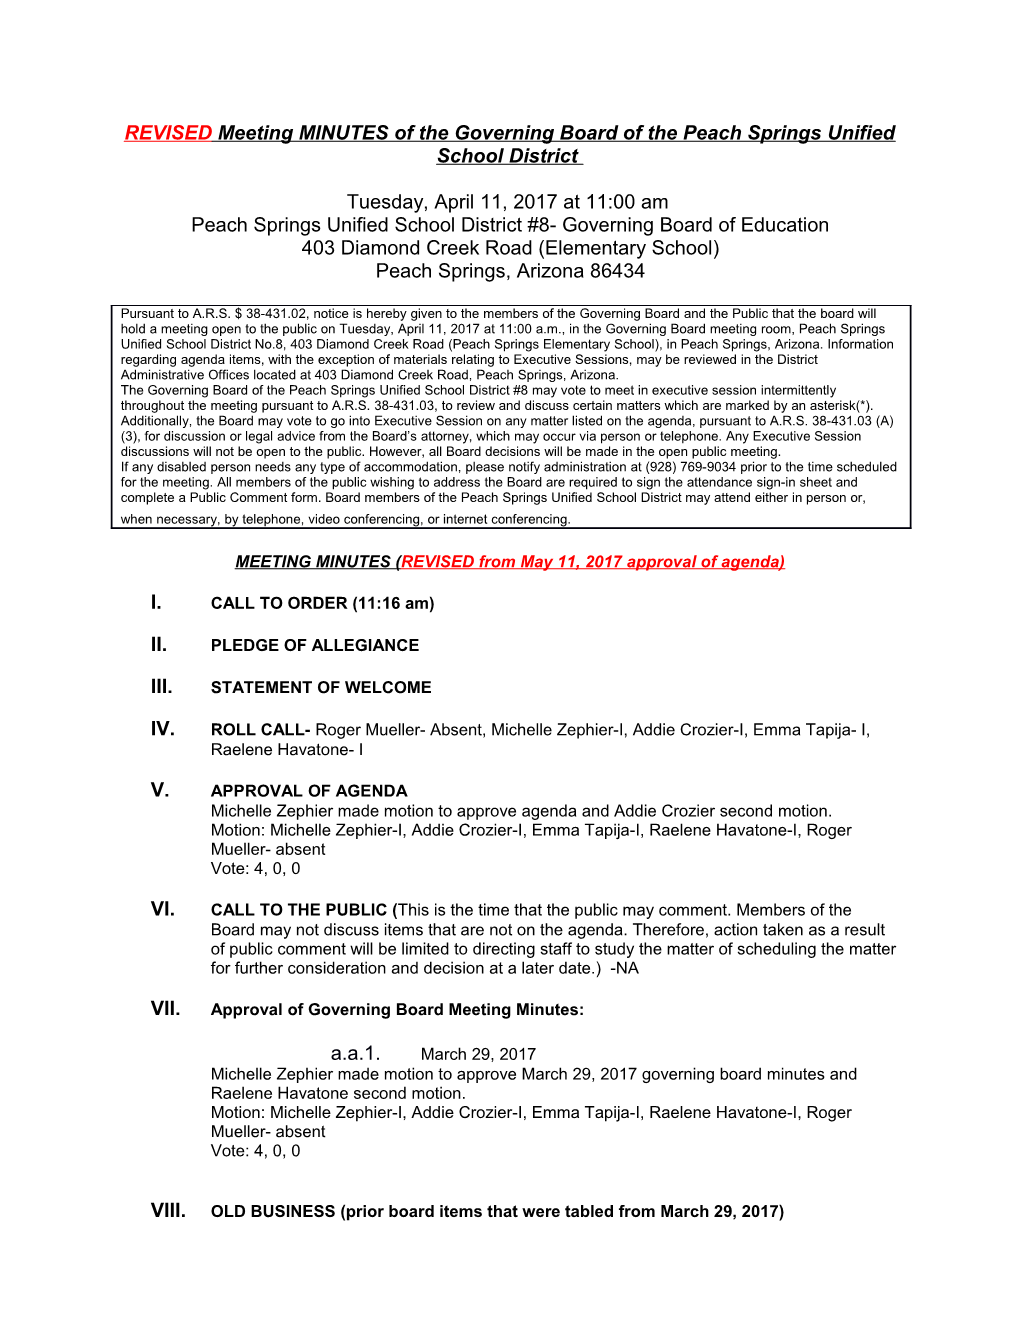 REVISED Meeting MINUTES of the Governing Board of the Peach Springs Unified School District